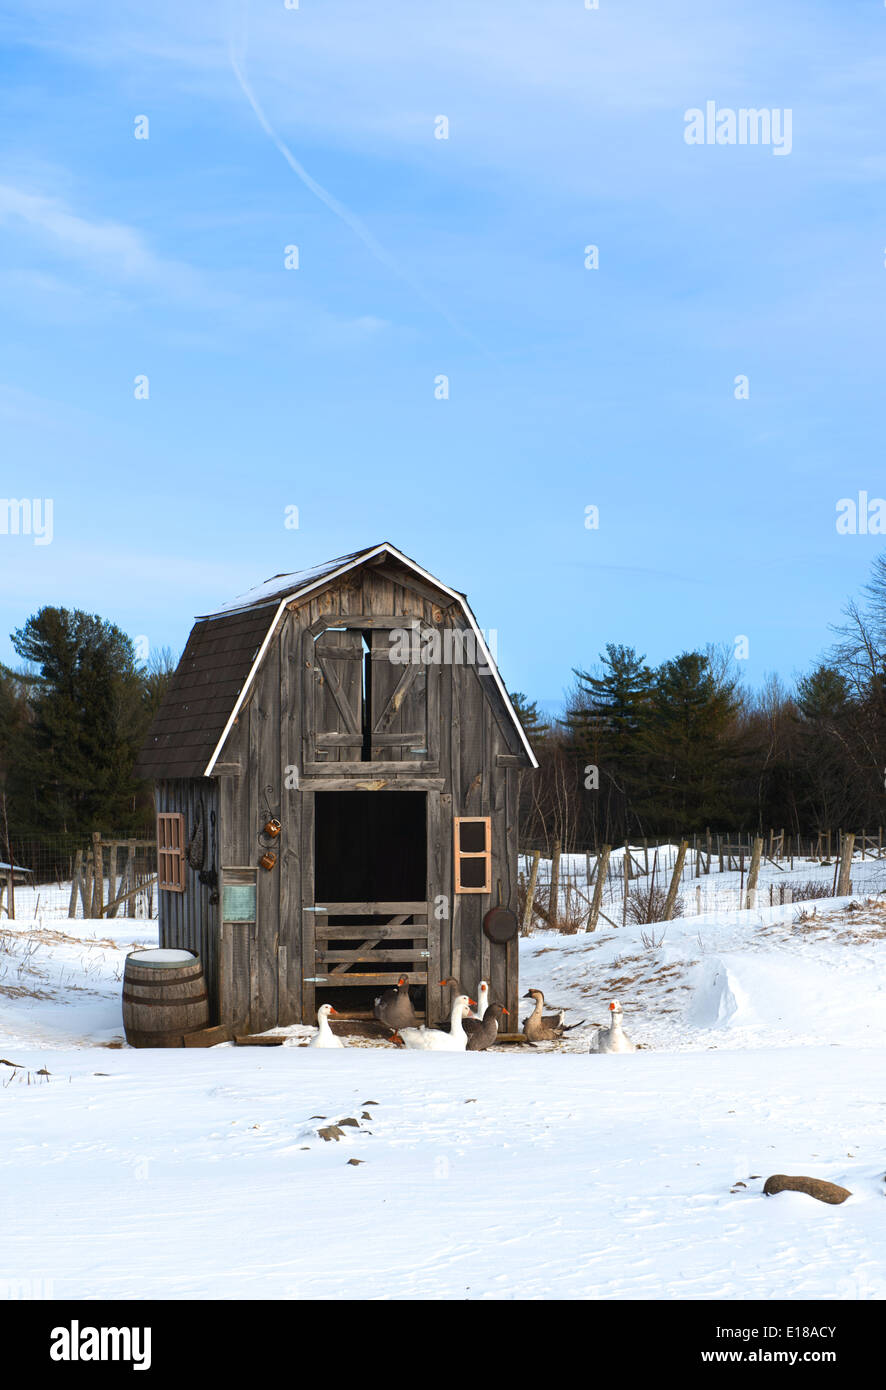 Wooden duck House with snow Stock Photo